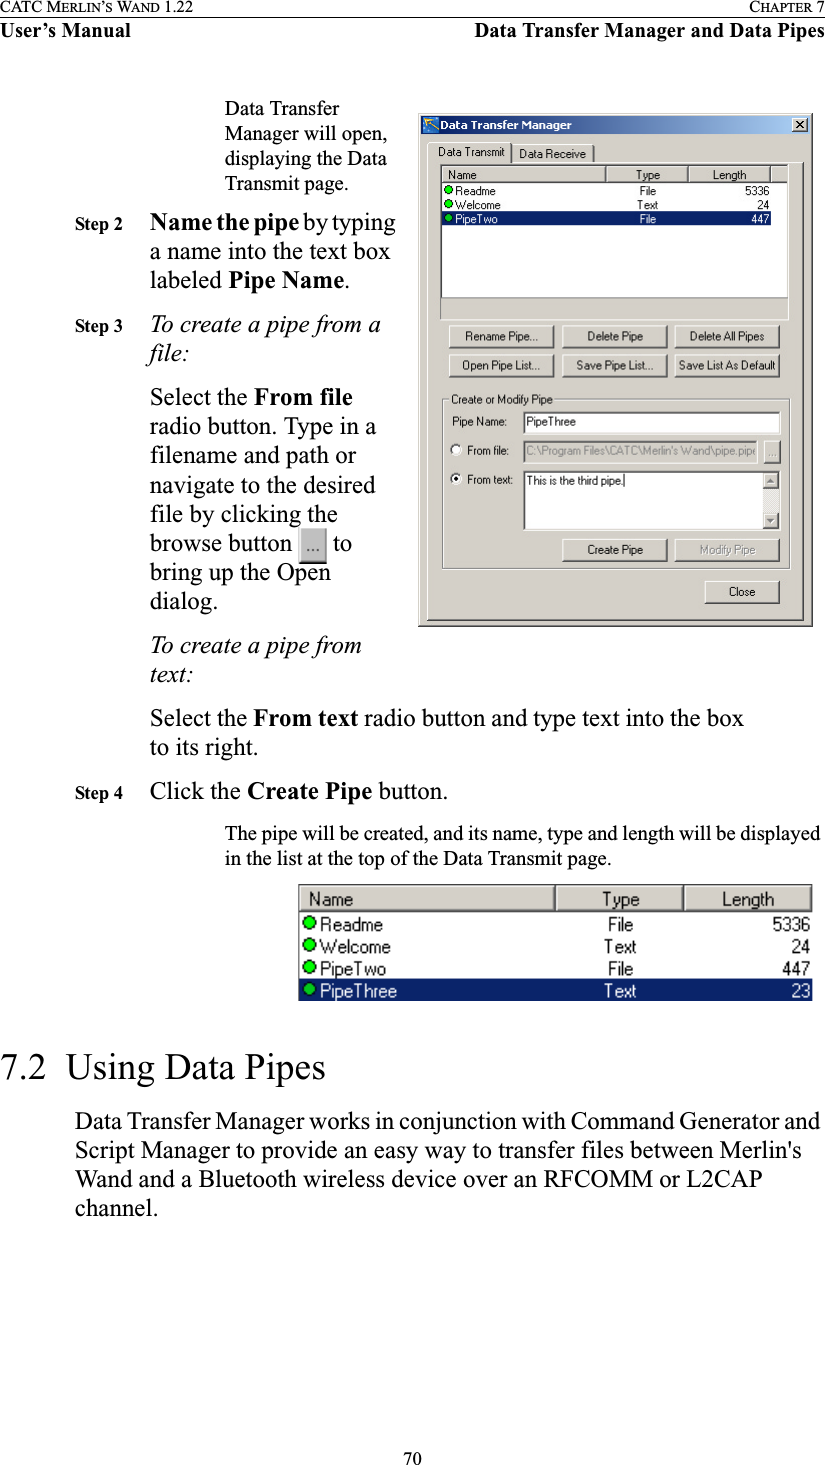 70CATC MERLIN’S WAND 1.22 CHAPTER 7User’s Manual Data Transfer Manager and Data PipesData Transfer Manager will open, displaying the Data Transmit page.Step 2 Name the pipe by typing a name into the text box labeled Pipe Name.Step 3 To create a pipe from a file:Select the From file radio button. Type in a filename and path or navigate to the desired file by clicking the browse button   to bring up the Open dialog.To create a pipe from text:Select the From text radio button and type text into the box to its right.Step 4 Click the Create Pipe button.The pipe will be created, and its name, type and length will be displayed in the list at the top of the Data Transmit page.7.2  Using Data PipesData Transfer Manager works in conjunction with Command Generator and Script Manager to provide an easy way to transfer files between Merlin&apos;s Wand and a Bluetooth wireless device over an RFCOMM or L2CAP channel.